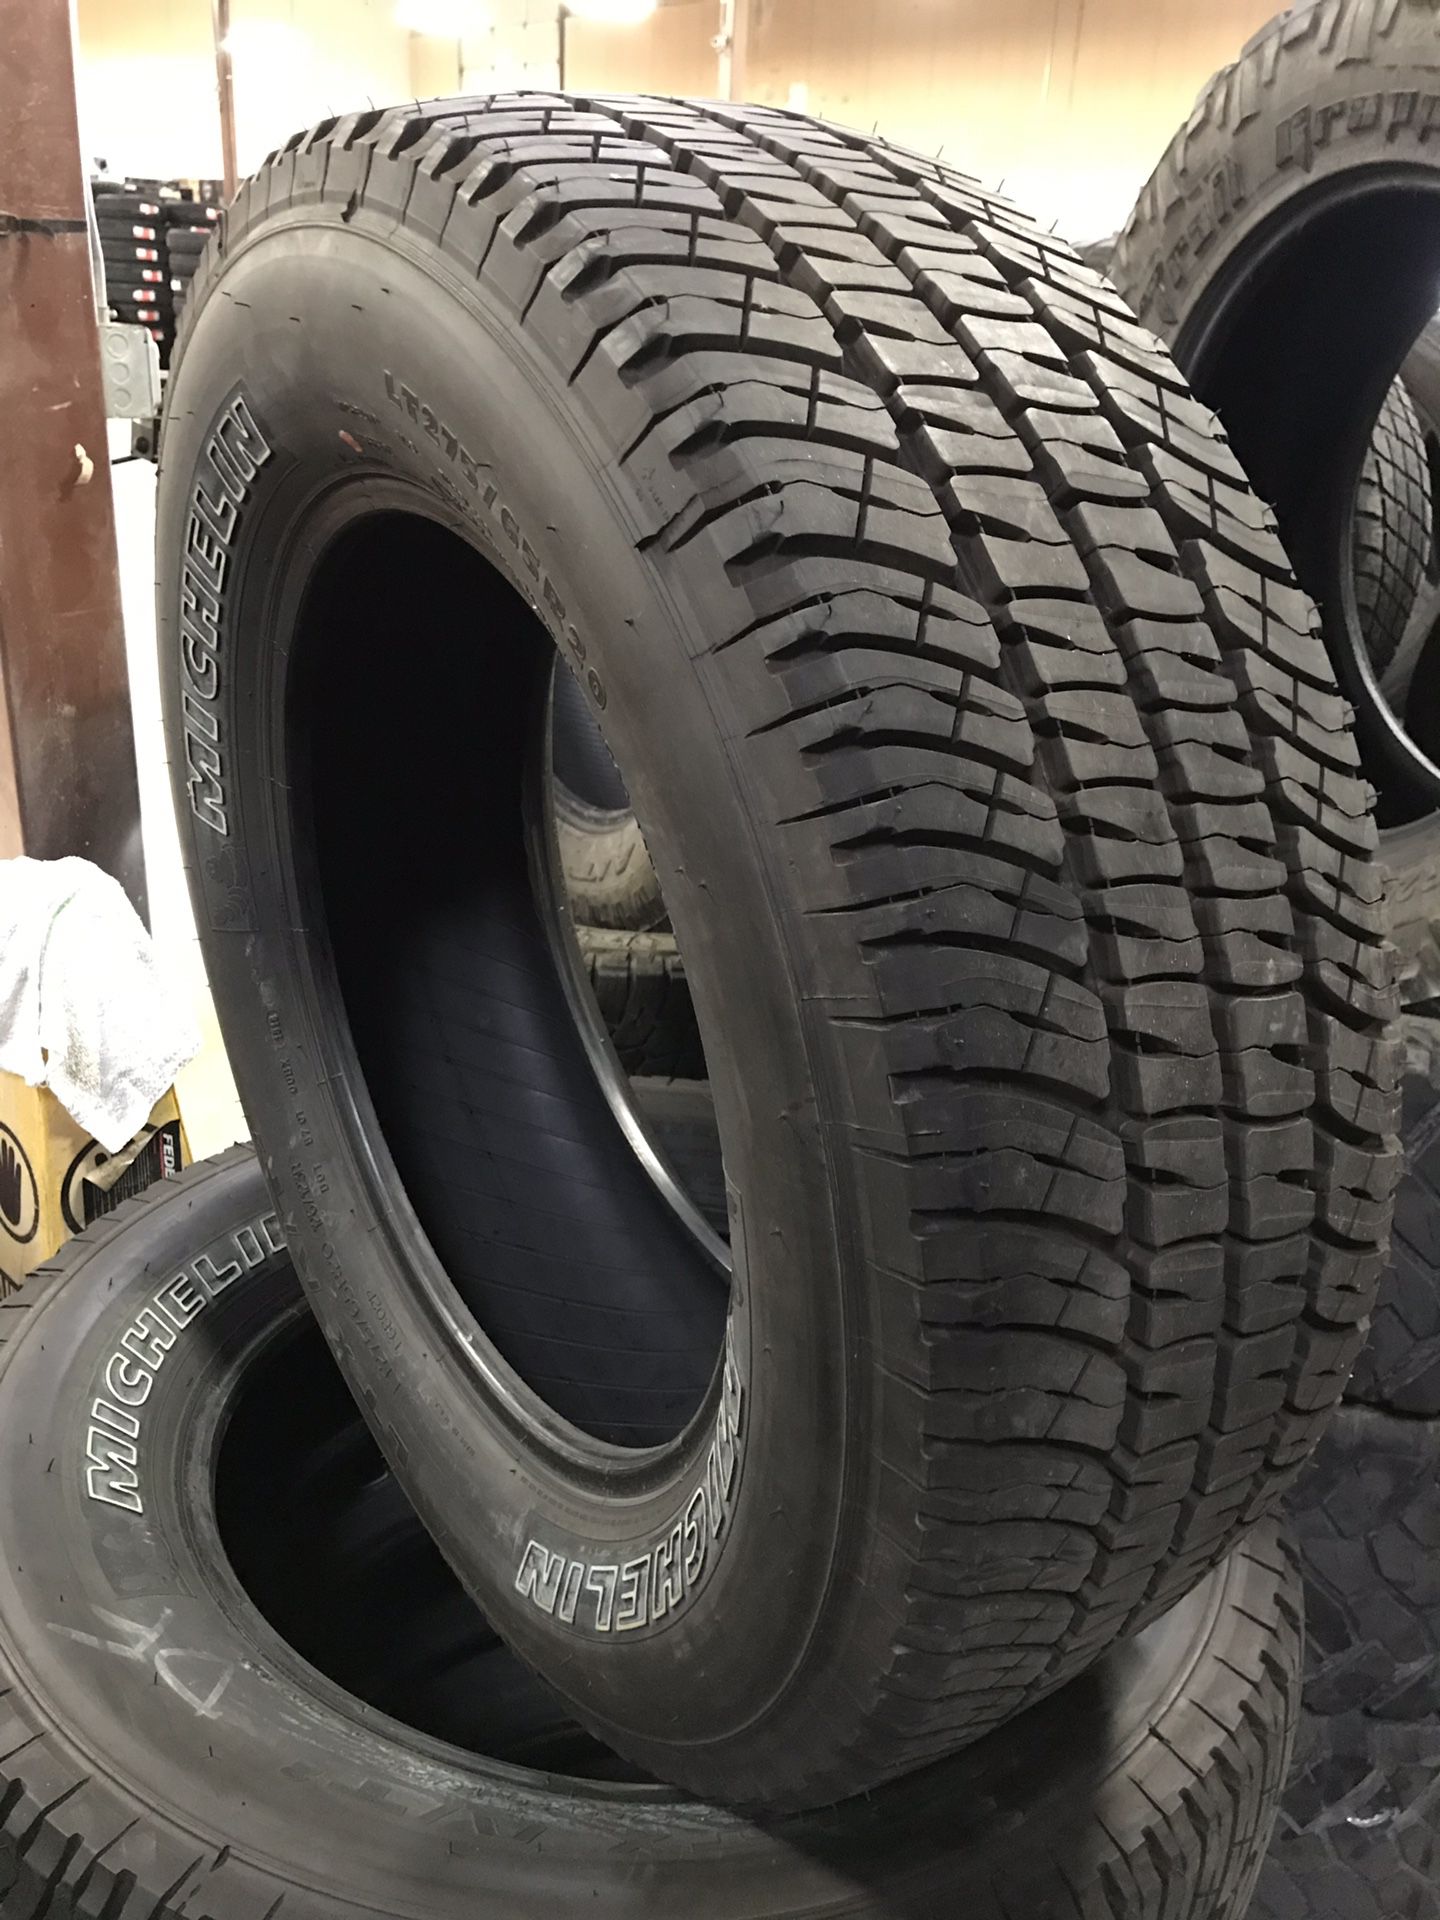 Like New 20” Inch Michelin AT2 LT 275/65R20 2756520 27565R20 Tires With 99% Tread